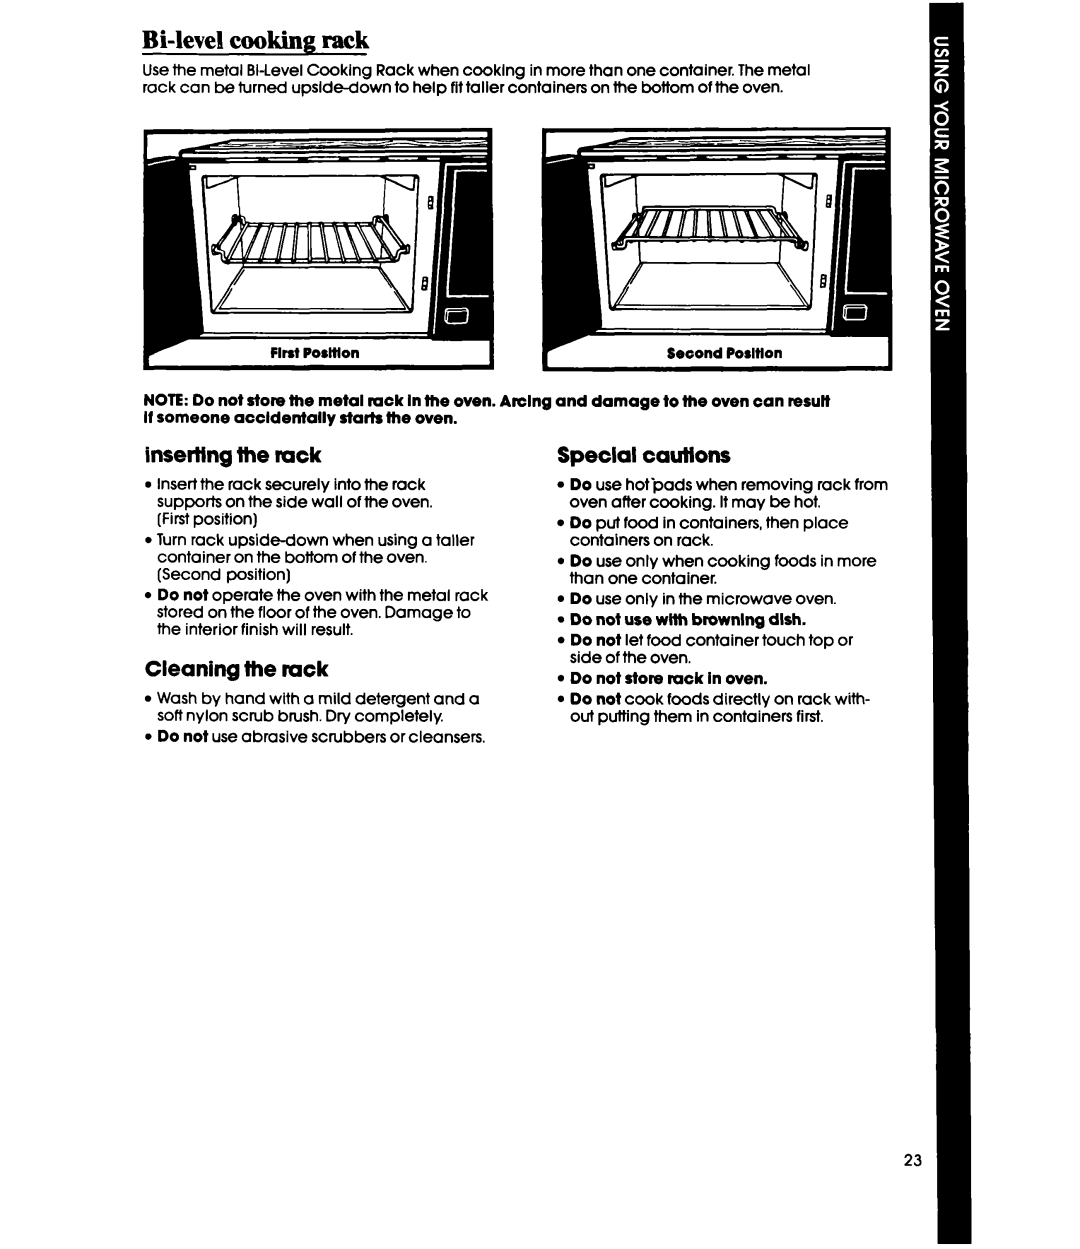 Whirlpool MW36OOXS manual Bi-levelcooking rack, inserting the rack, Cleaning the rack, Special cautions 